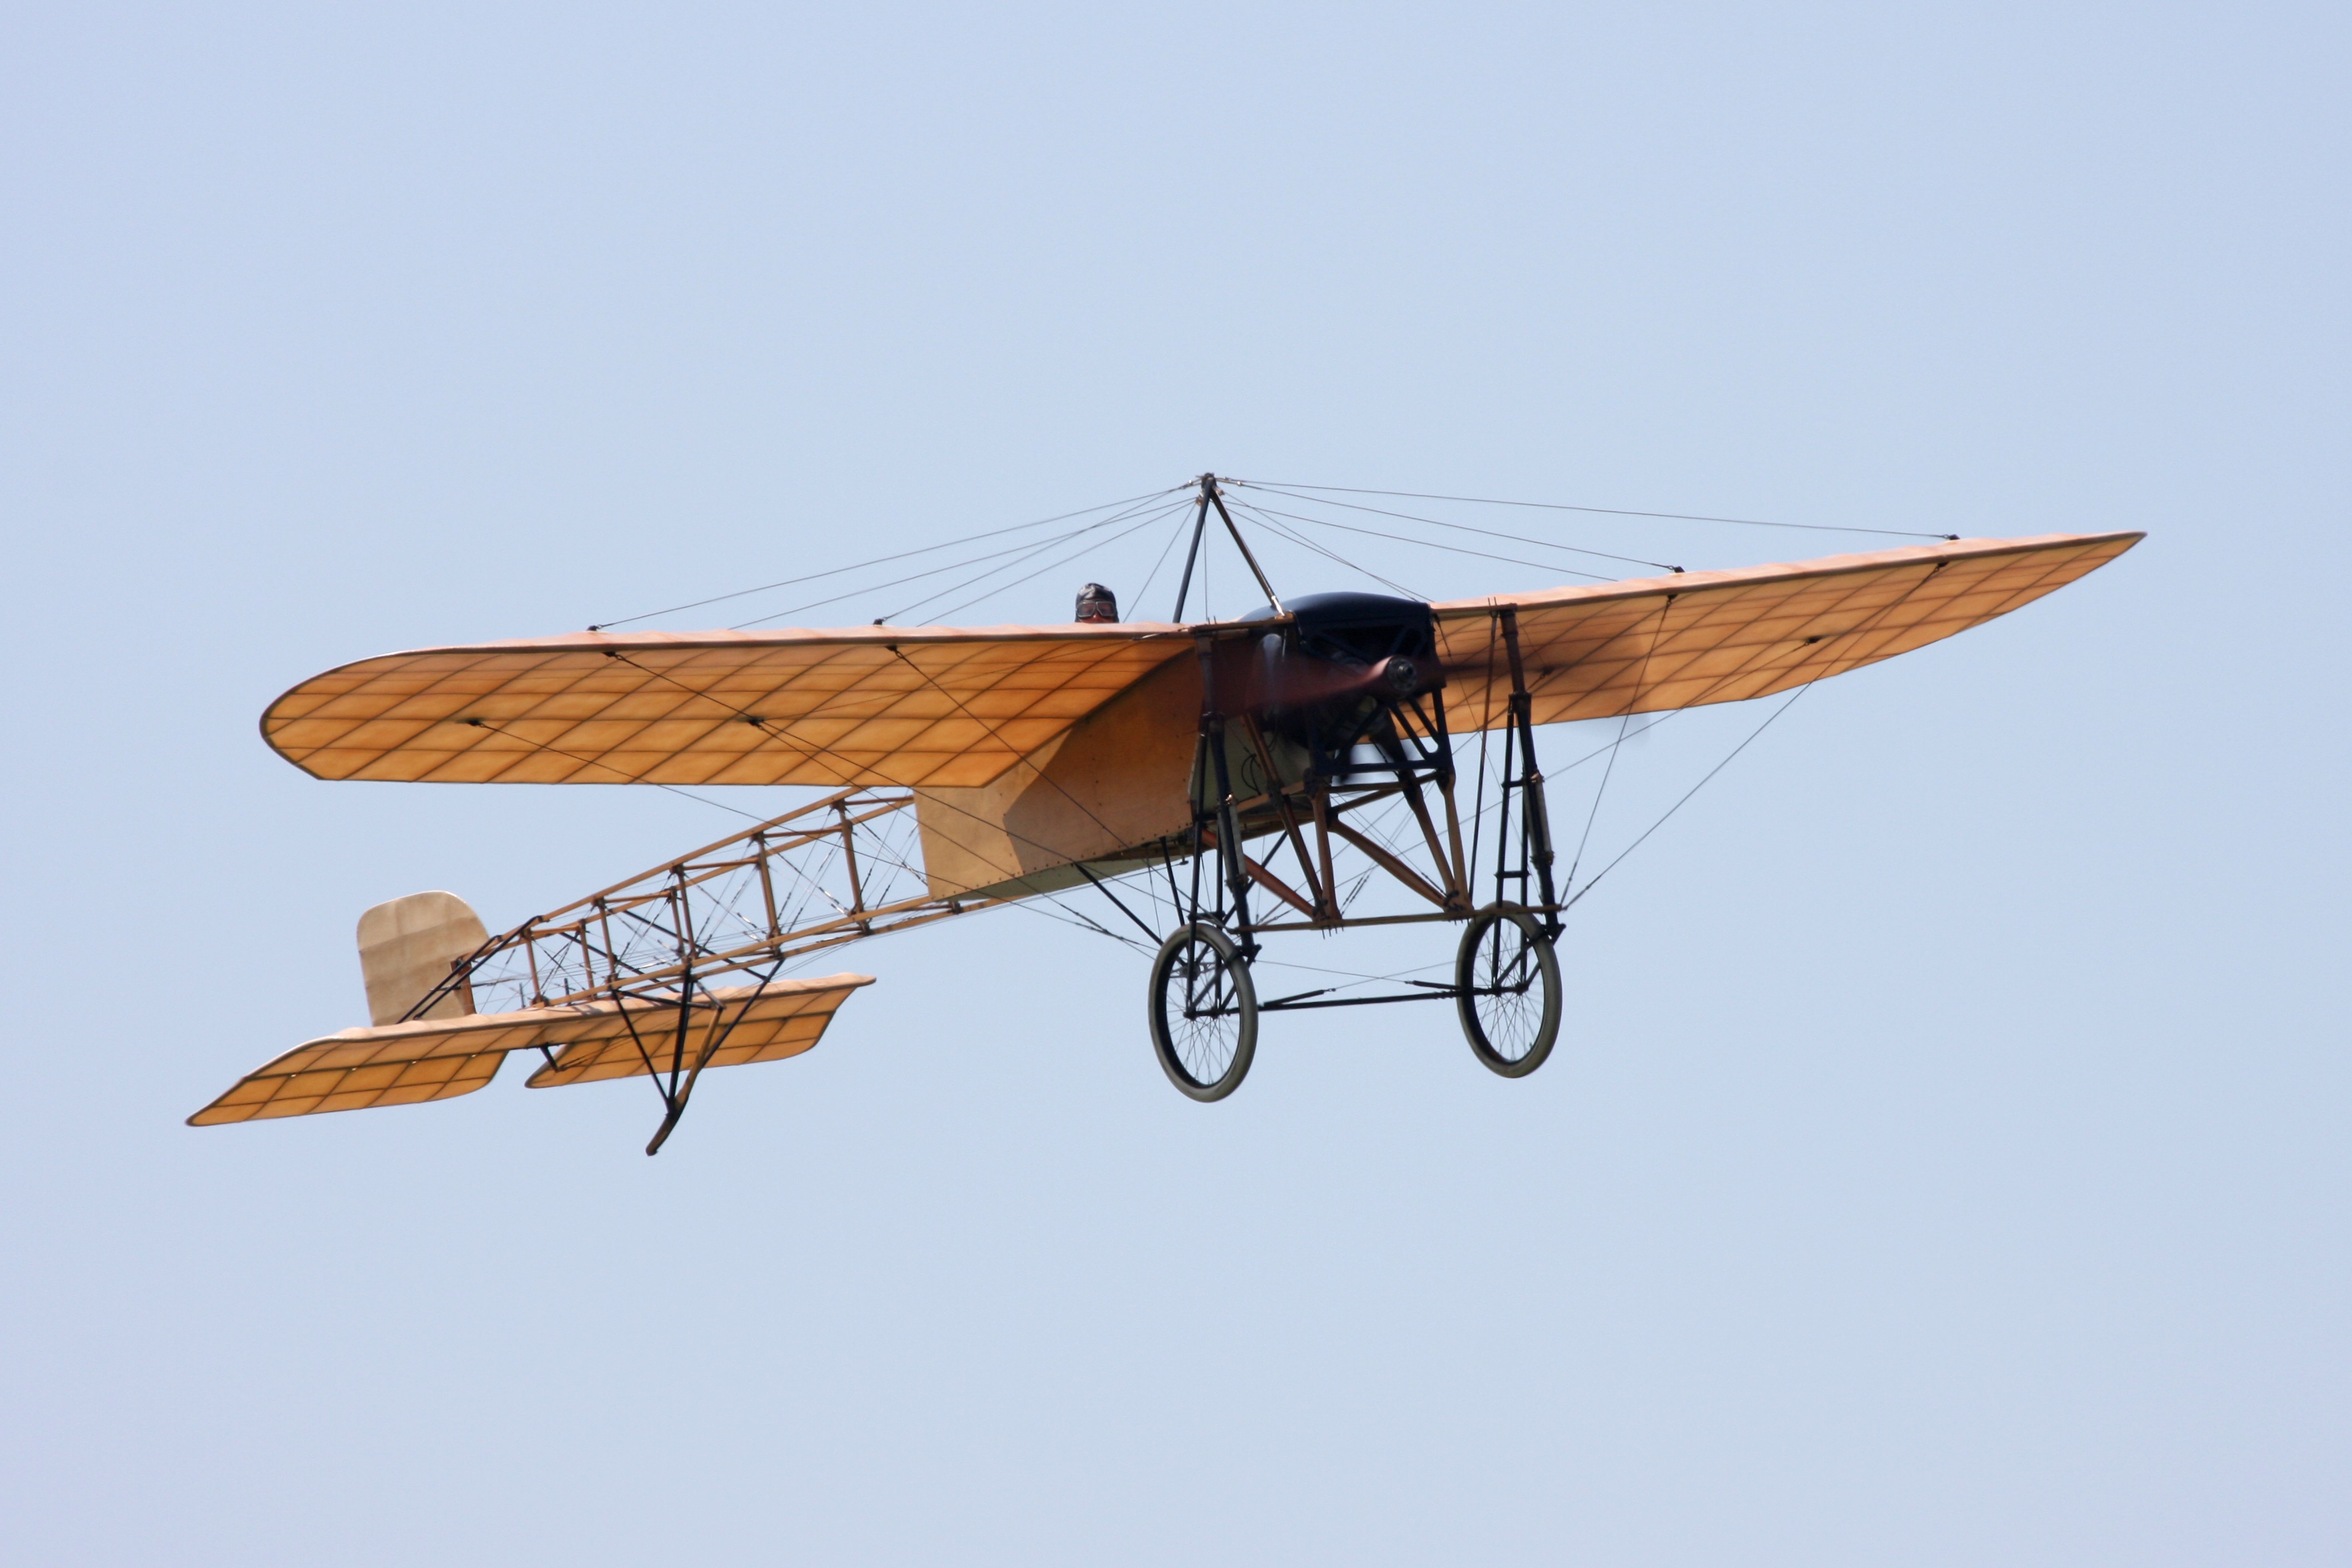 A Bleriot XI flying in the sky.